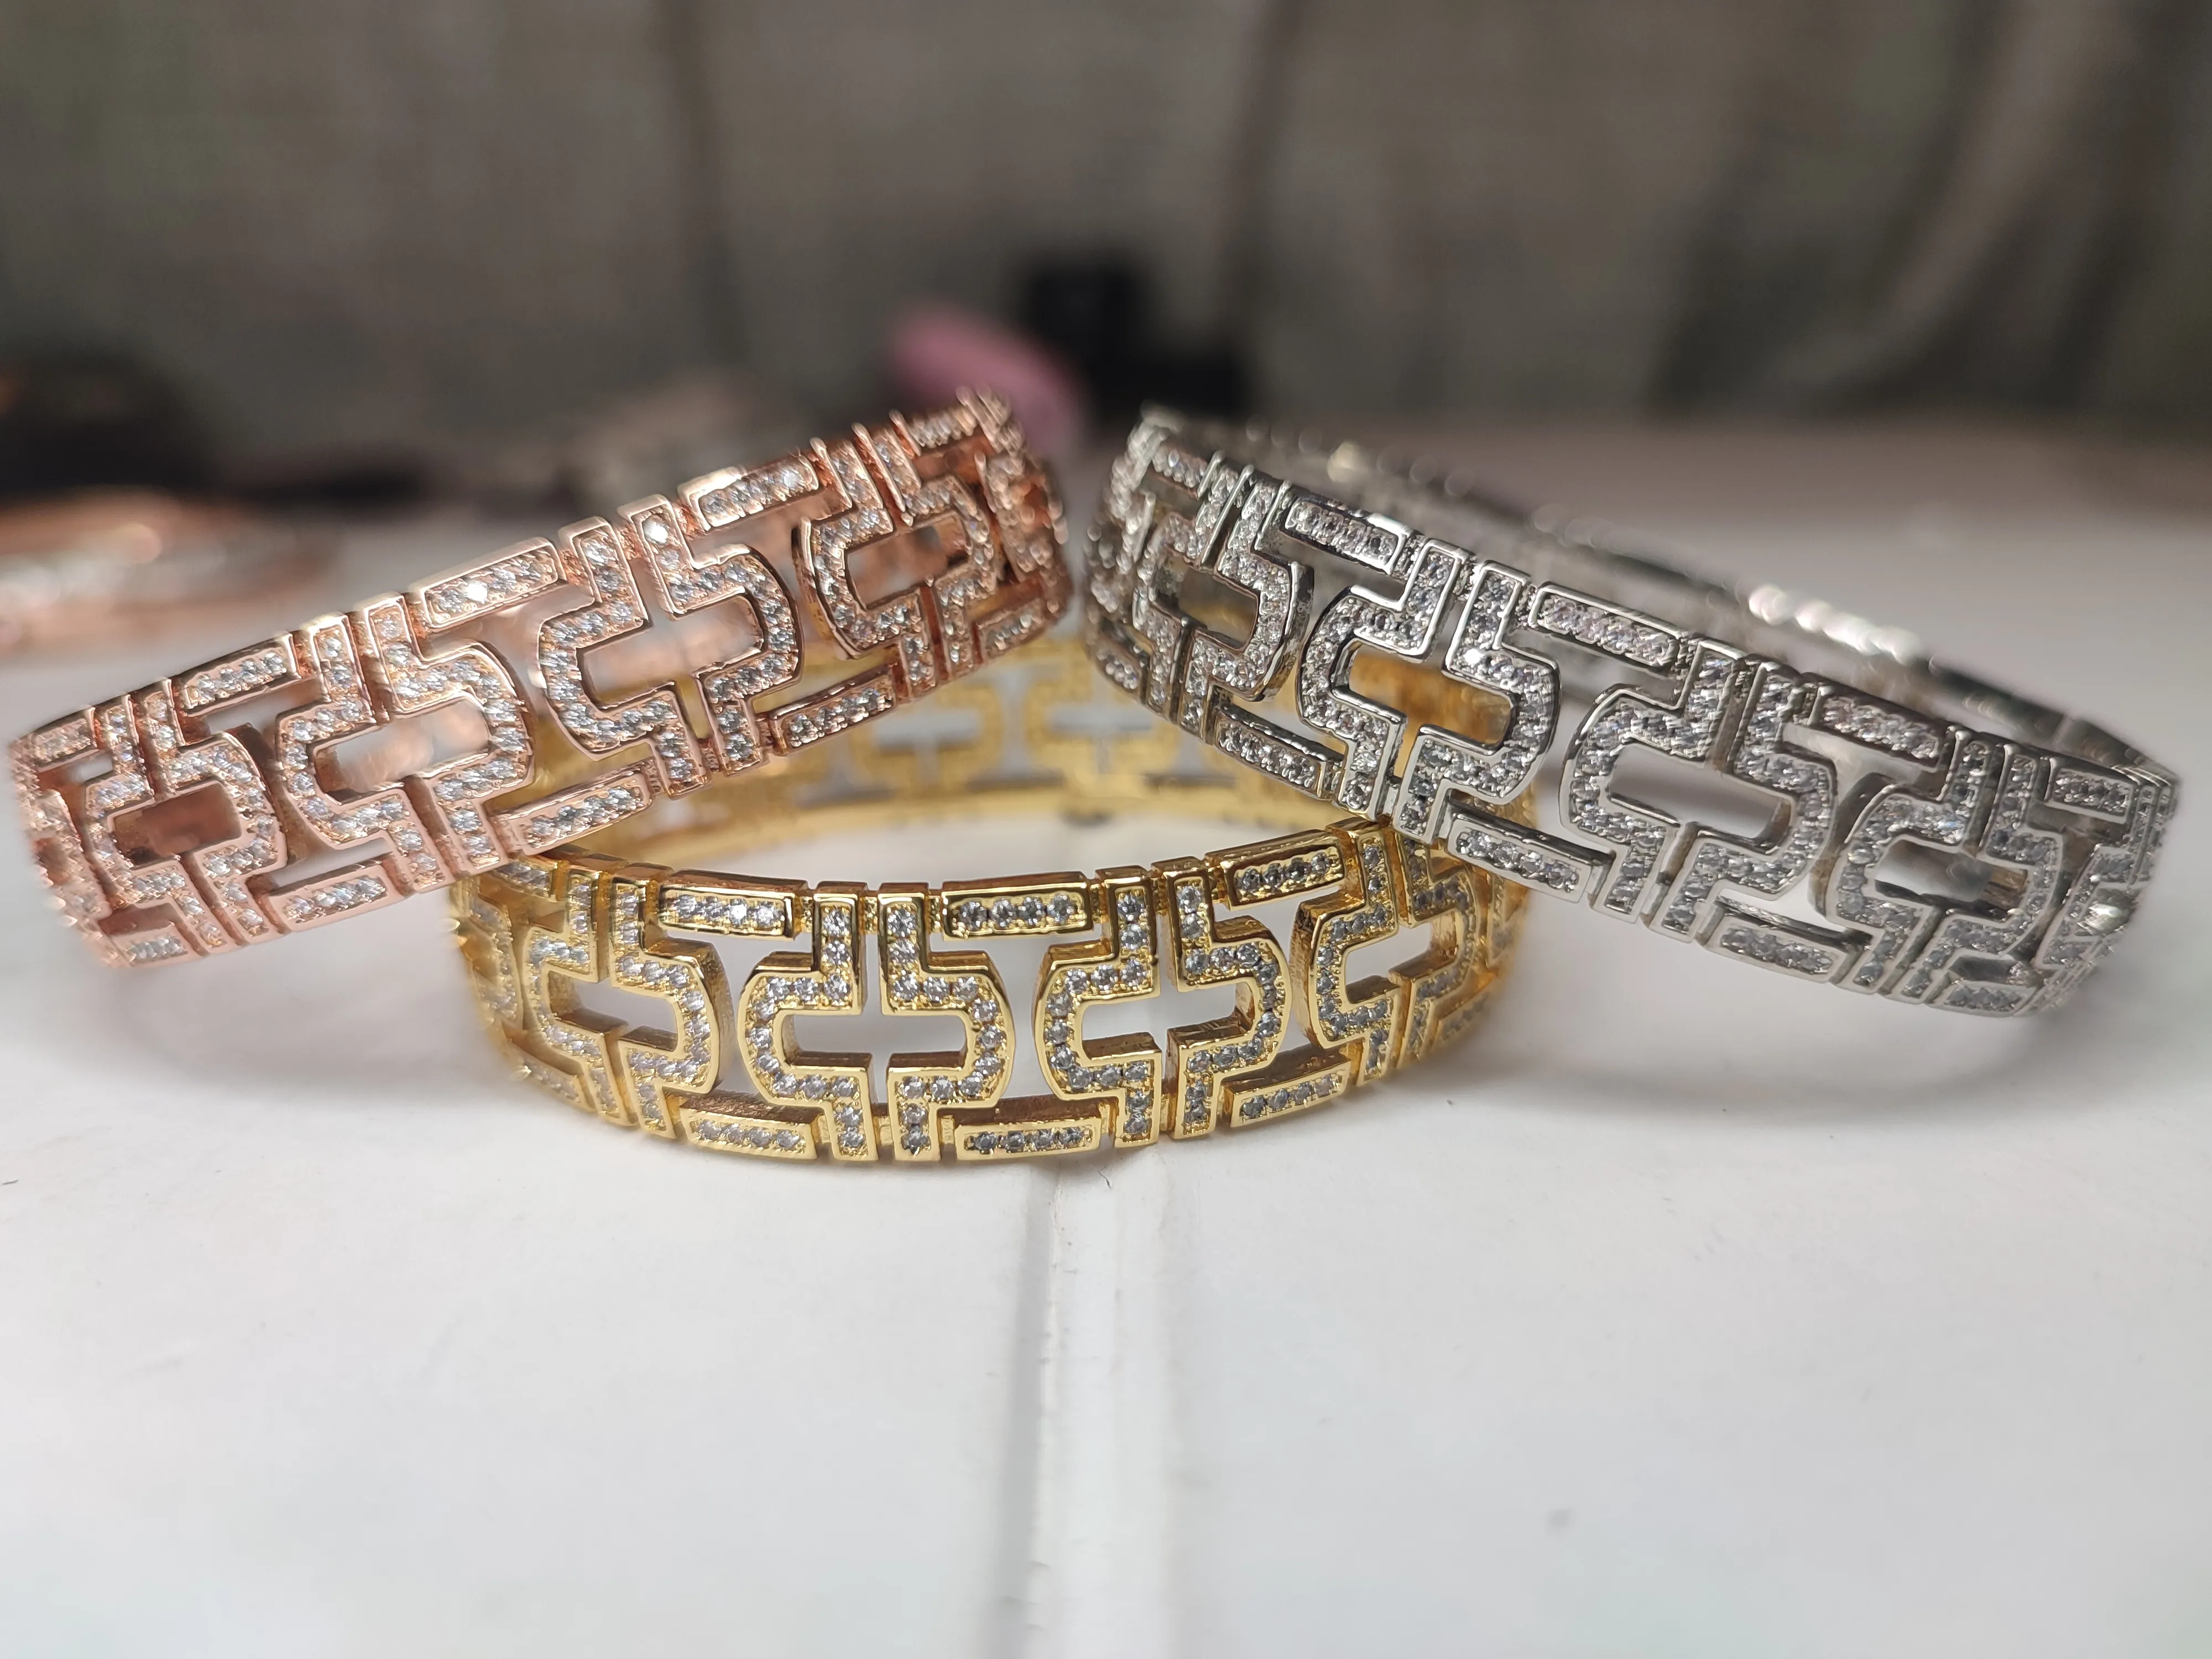 Designer Gold Gold And Diamond Bangles Armband With Diamond Accents Luxury  Stainless Steel Bracelet For Men And Women From Caifumima, $114.44 |  DHgate.Com